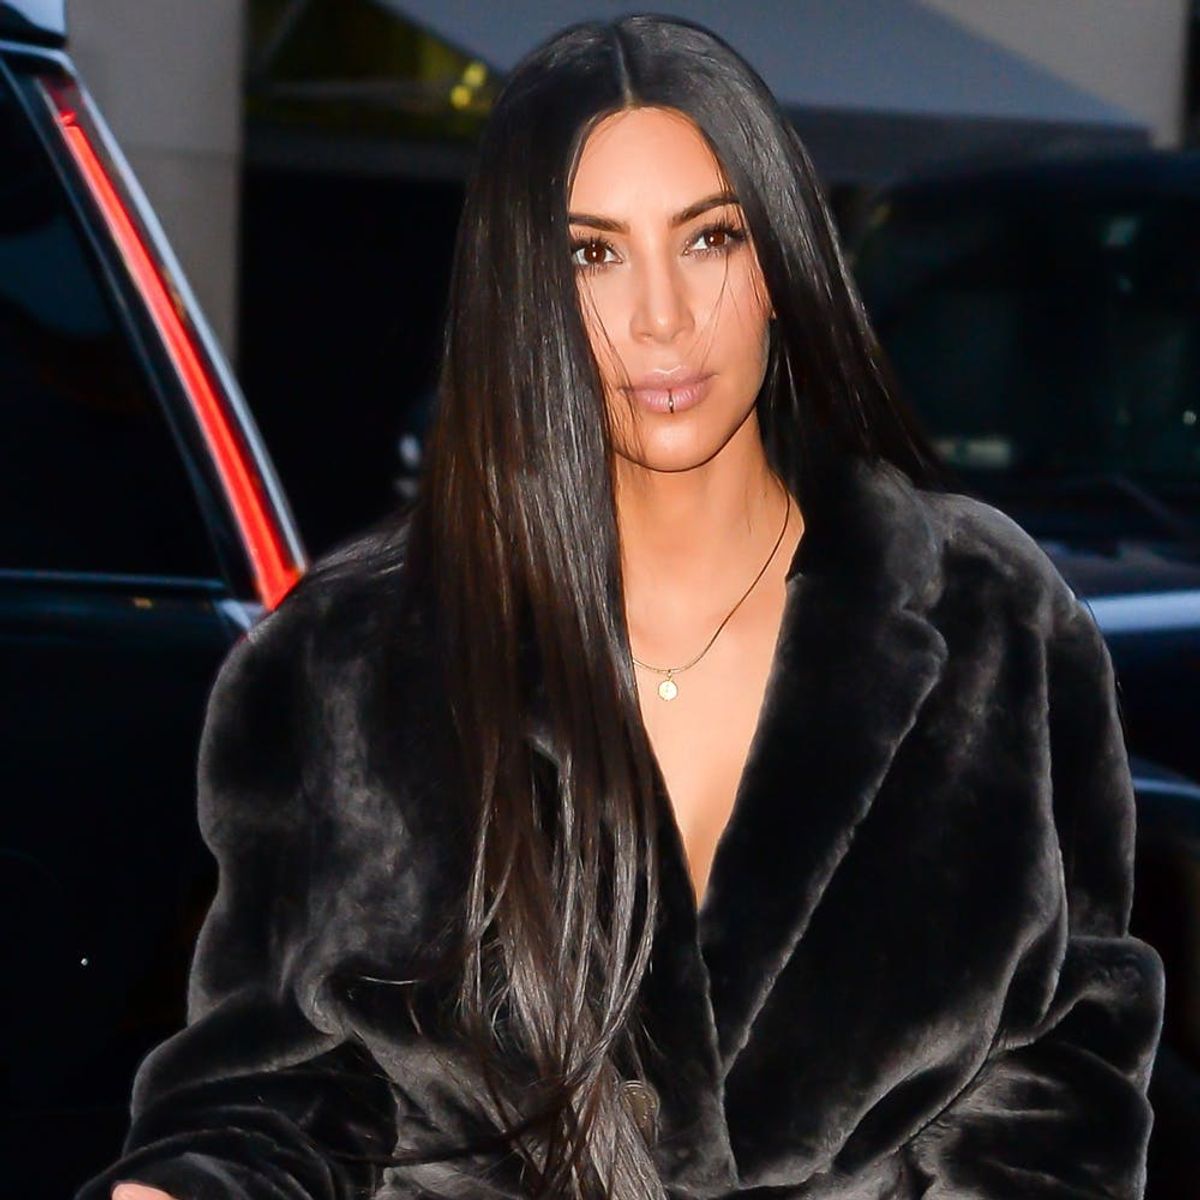 20 Things You Never Knew About Kim Kardashian West As Told by Kim Herself